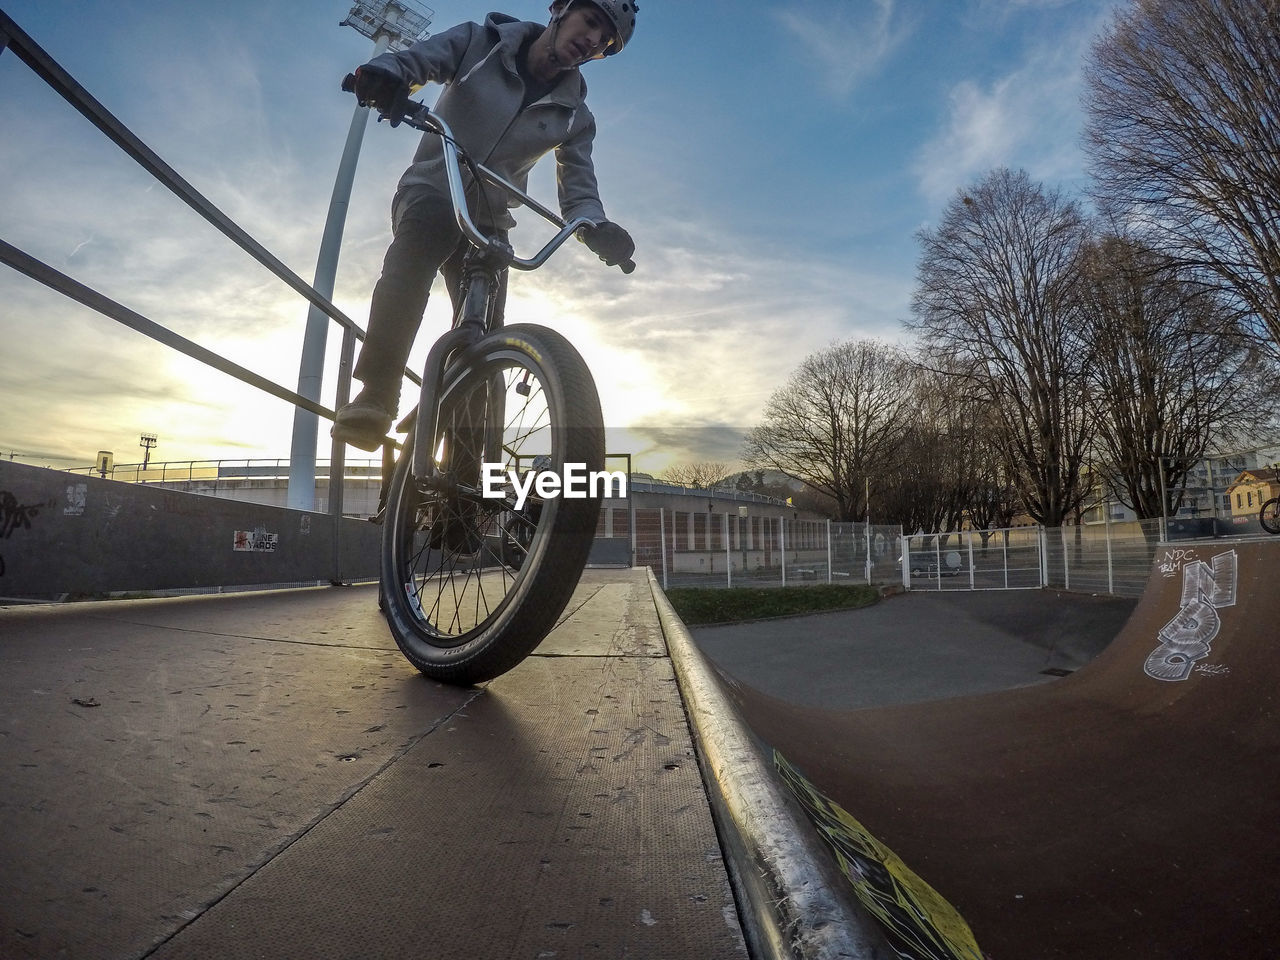 Young man on bicycle in skate park